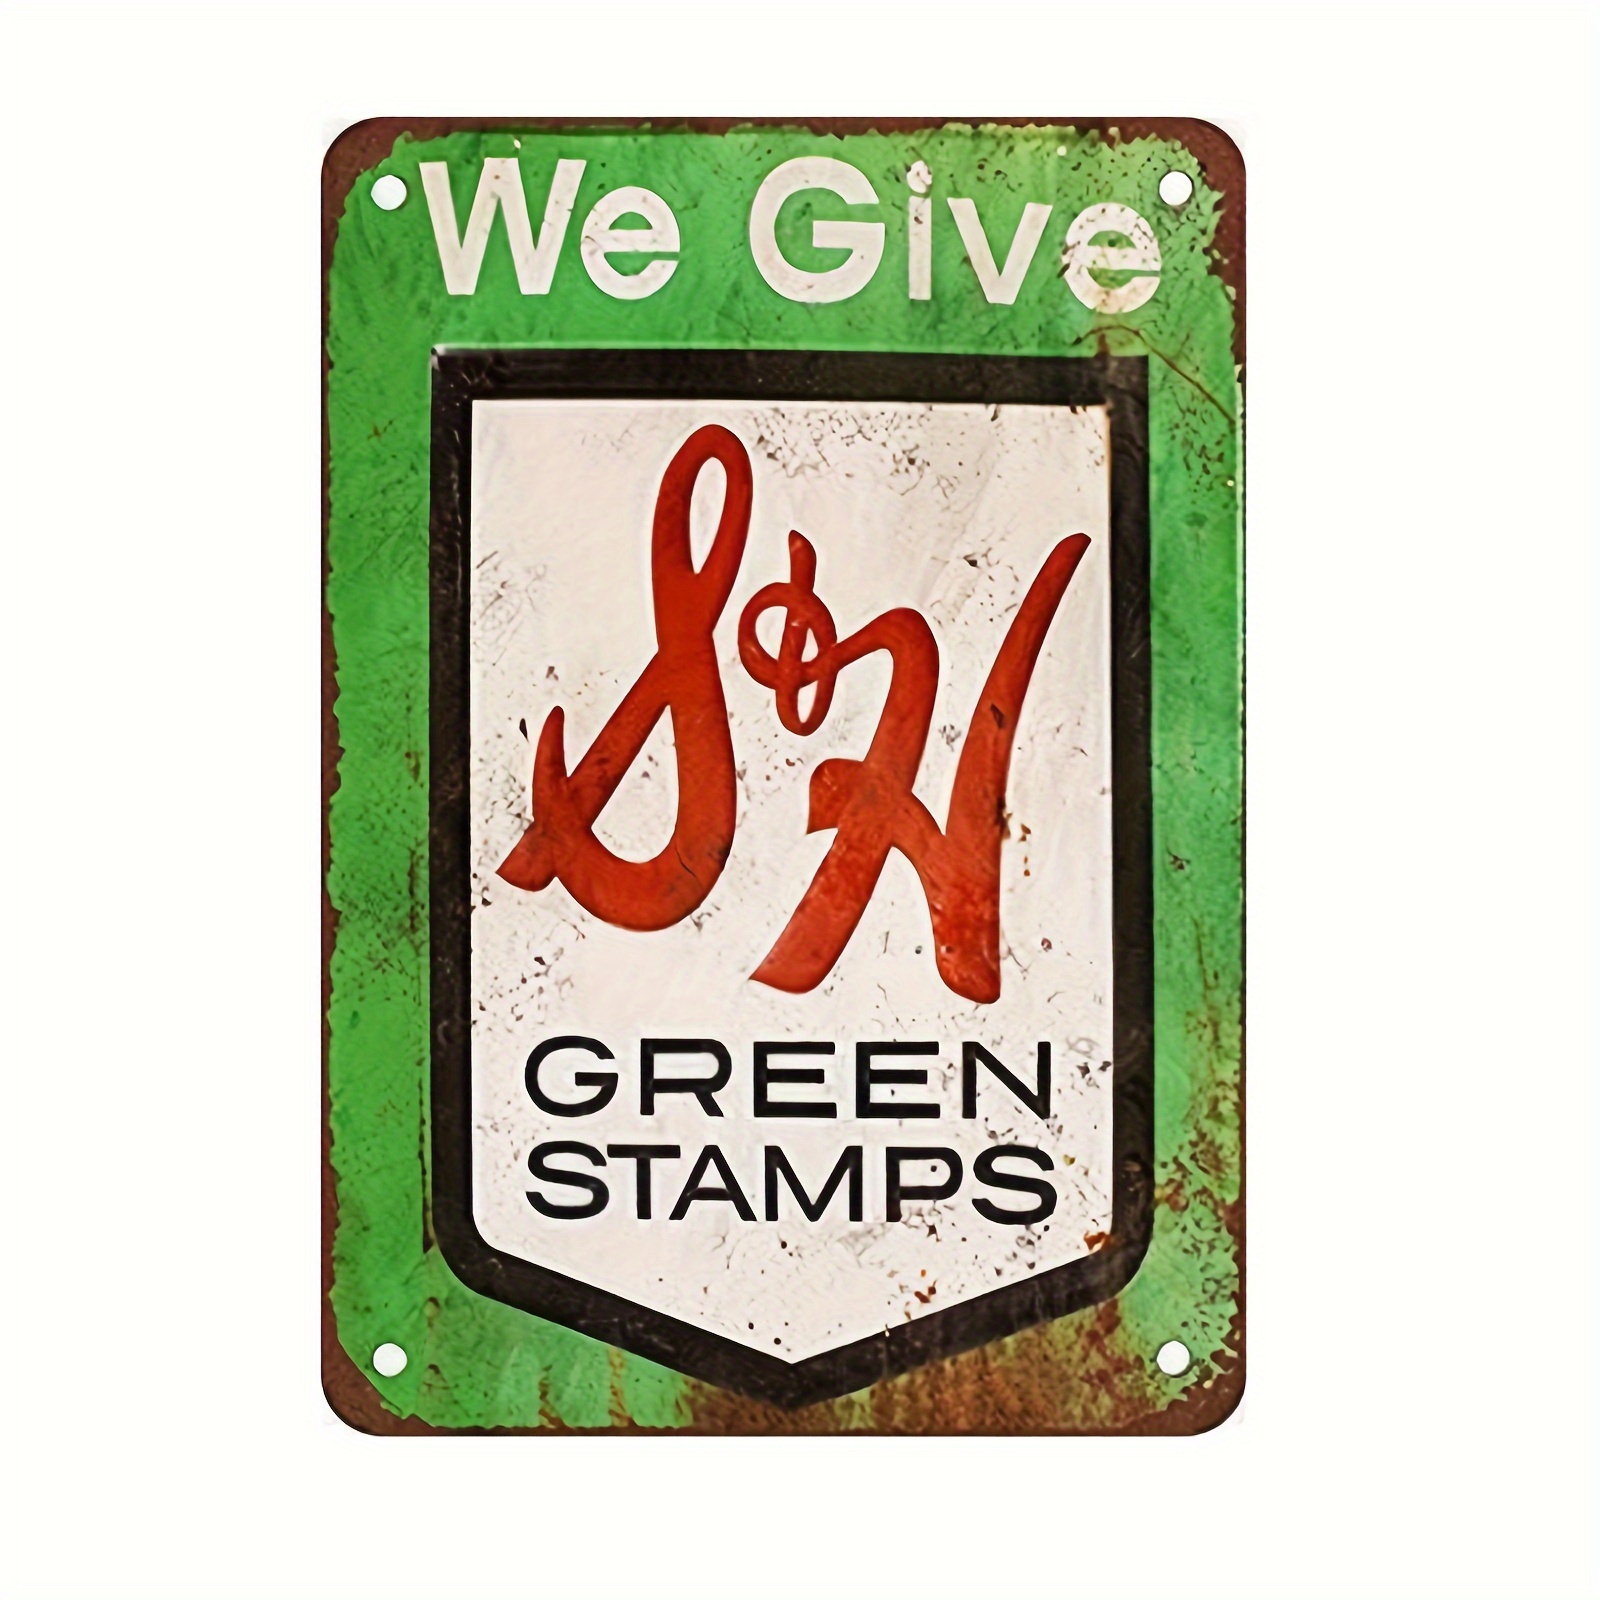 

Rustic Vintage S&h Green Stamps Metal Sign Decor, Durable Iron Construction, Retro Collectible Advertising Wall Art, Pre-drilled For Easy Hanging, 8x12 Inches - Fade & Uv Resistant